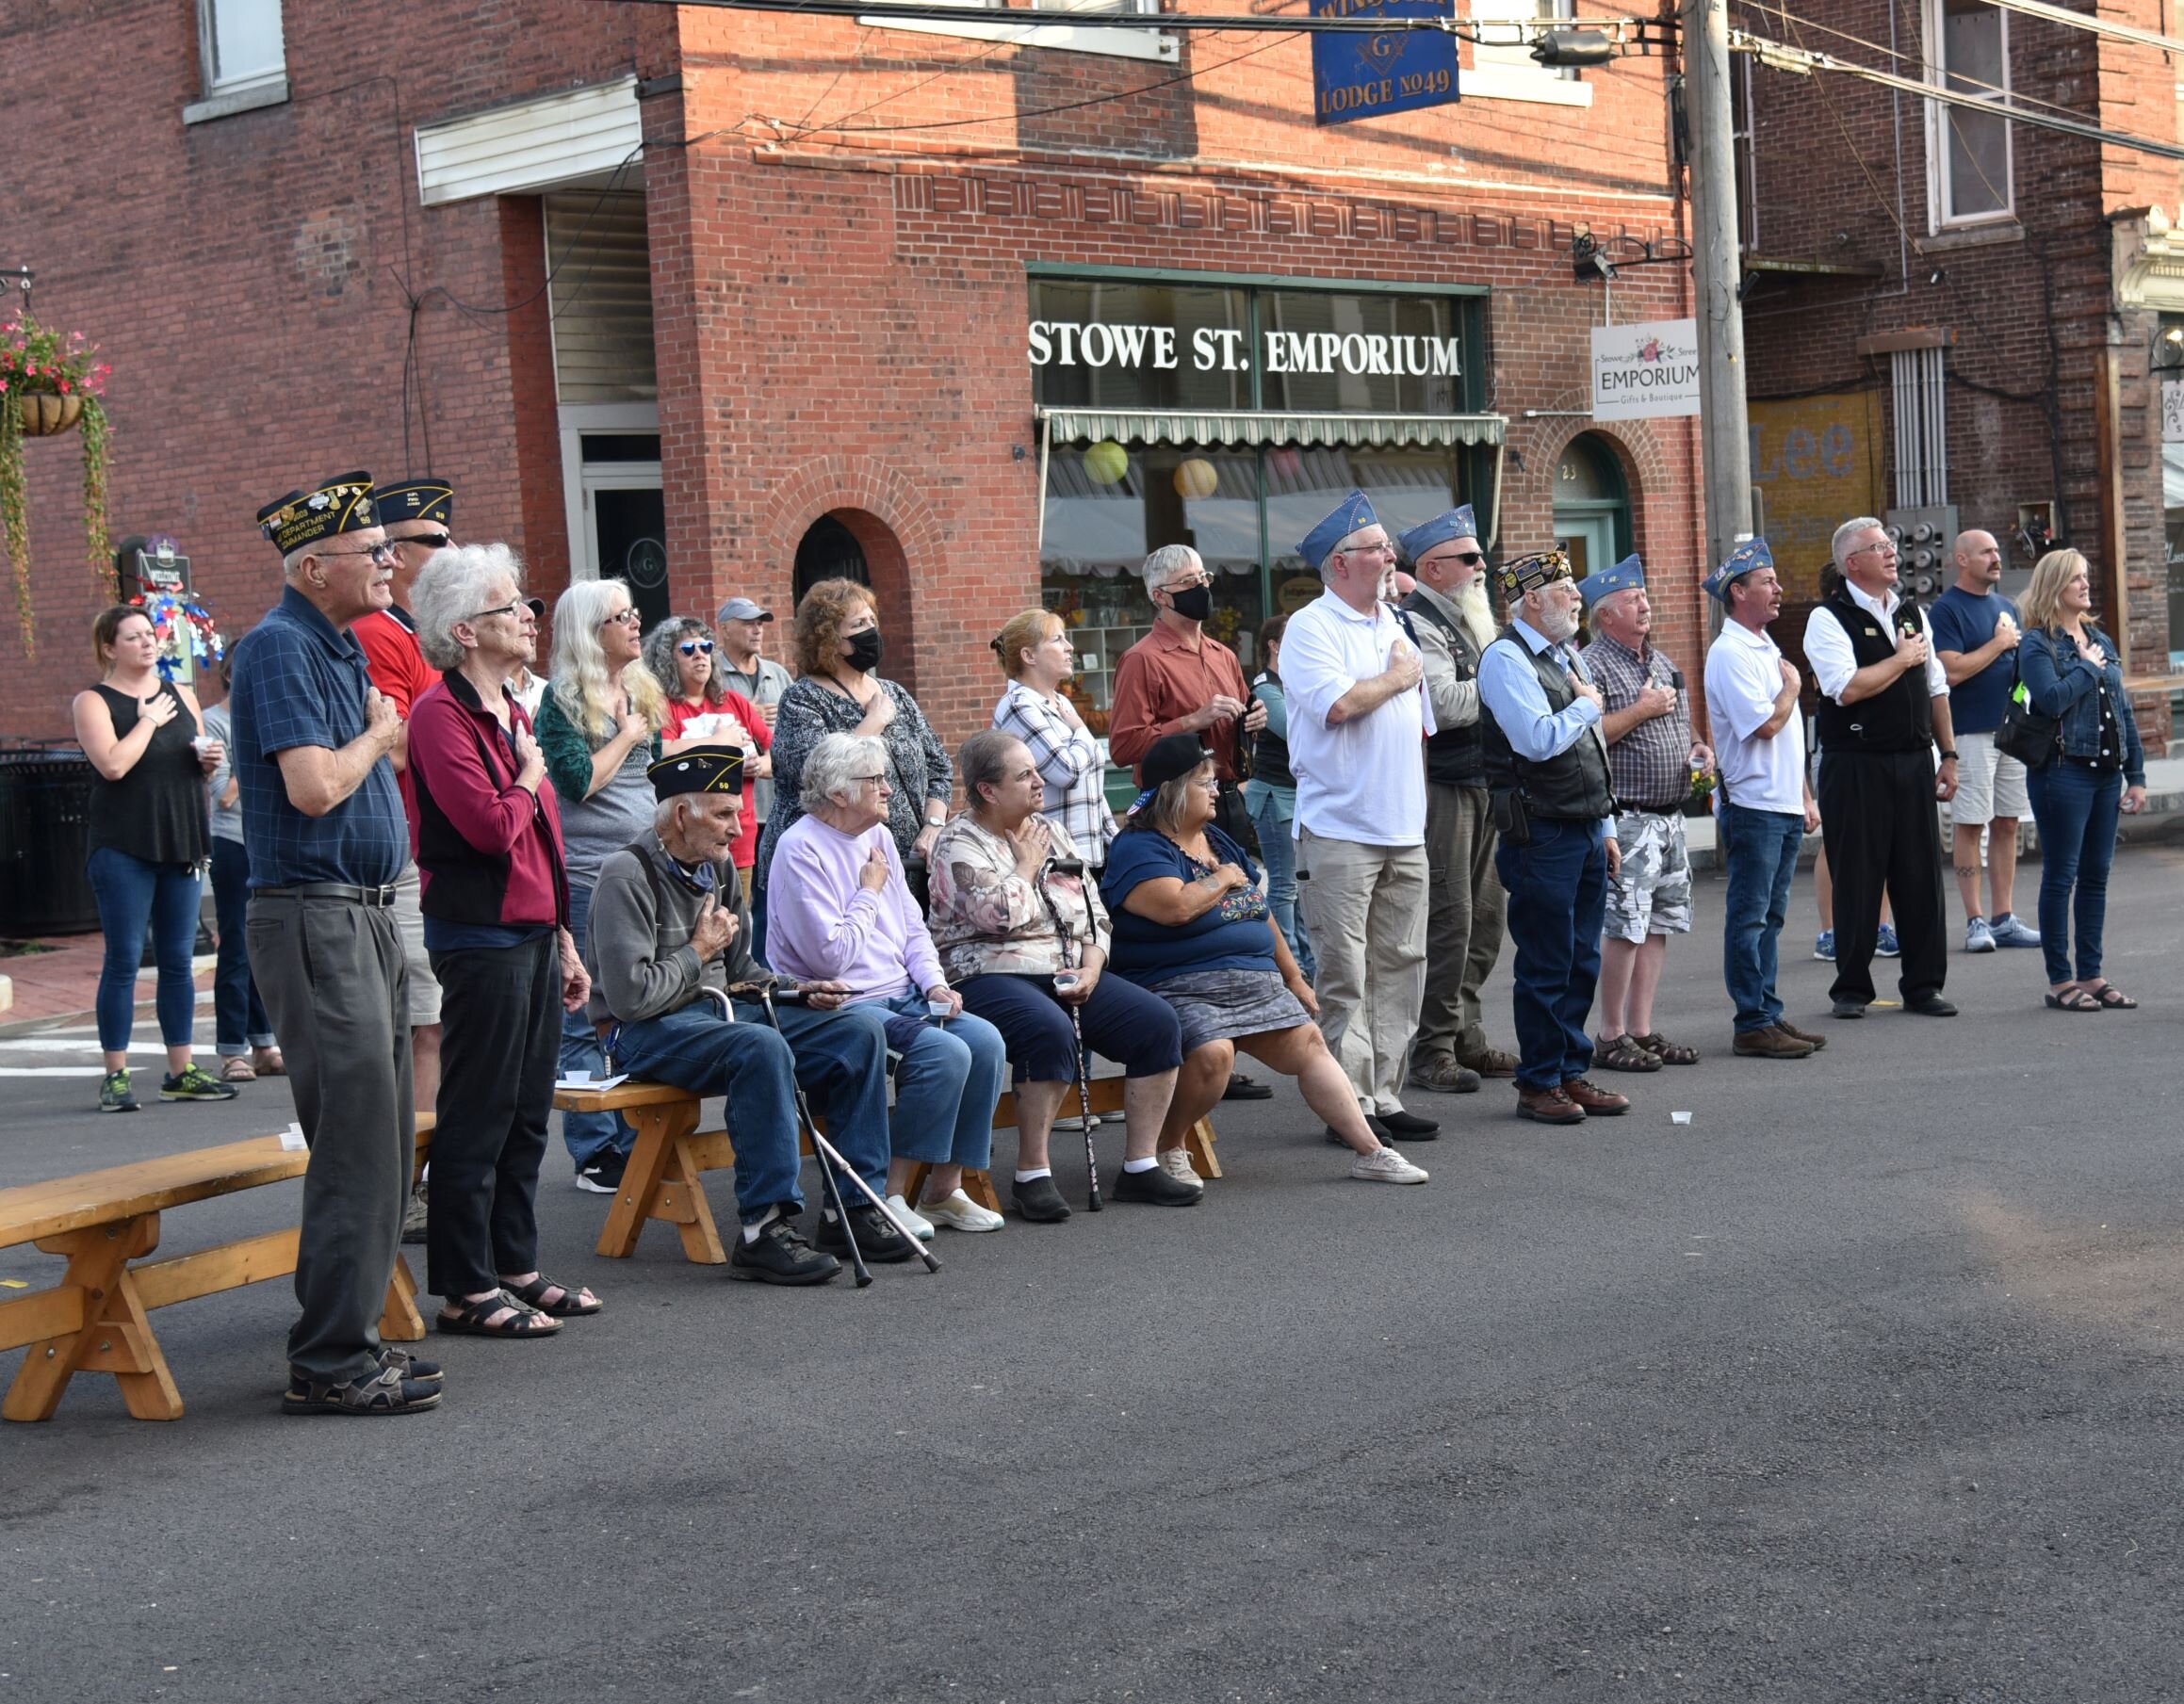  About 40 people attend the service on Stowe Street.  Photo by Gordon Miller 